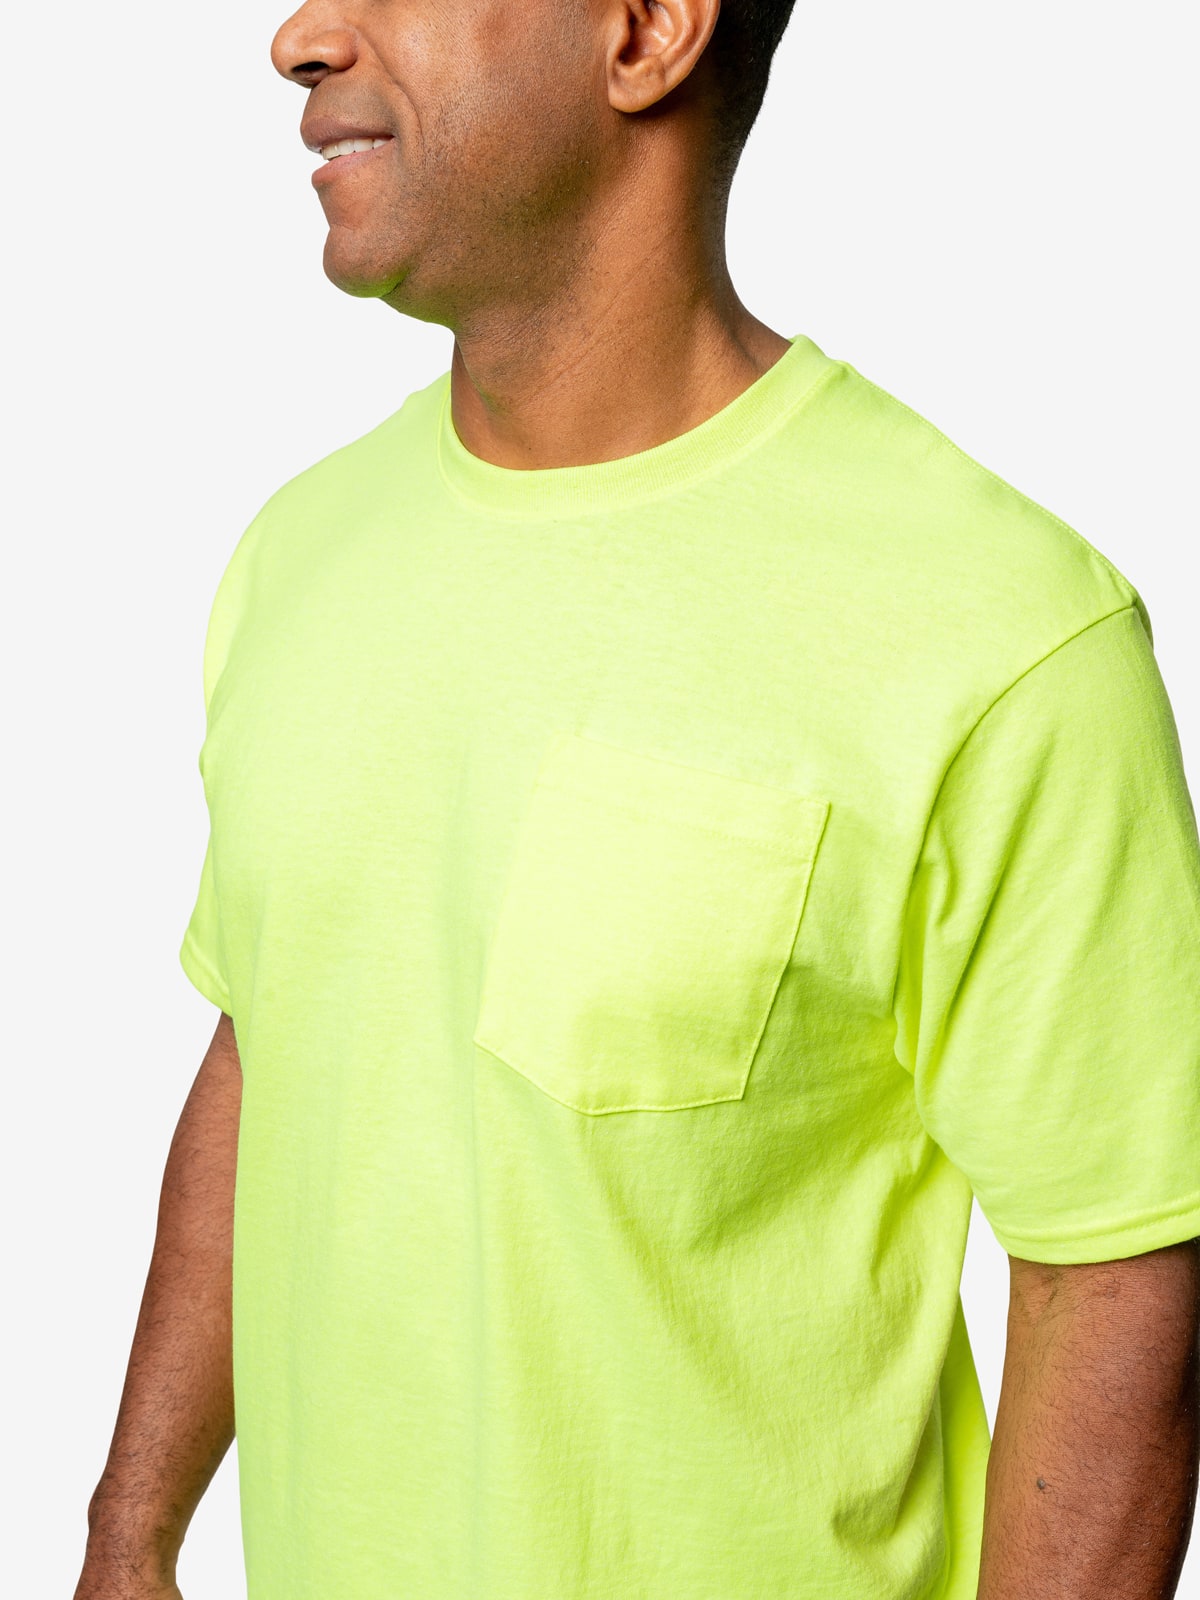 Insect Shield Men's Safety Short-Sleeve Pocket T-Shirt